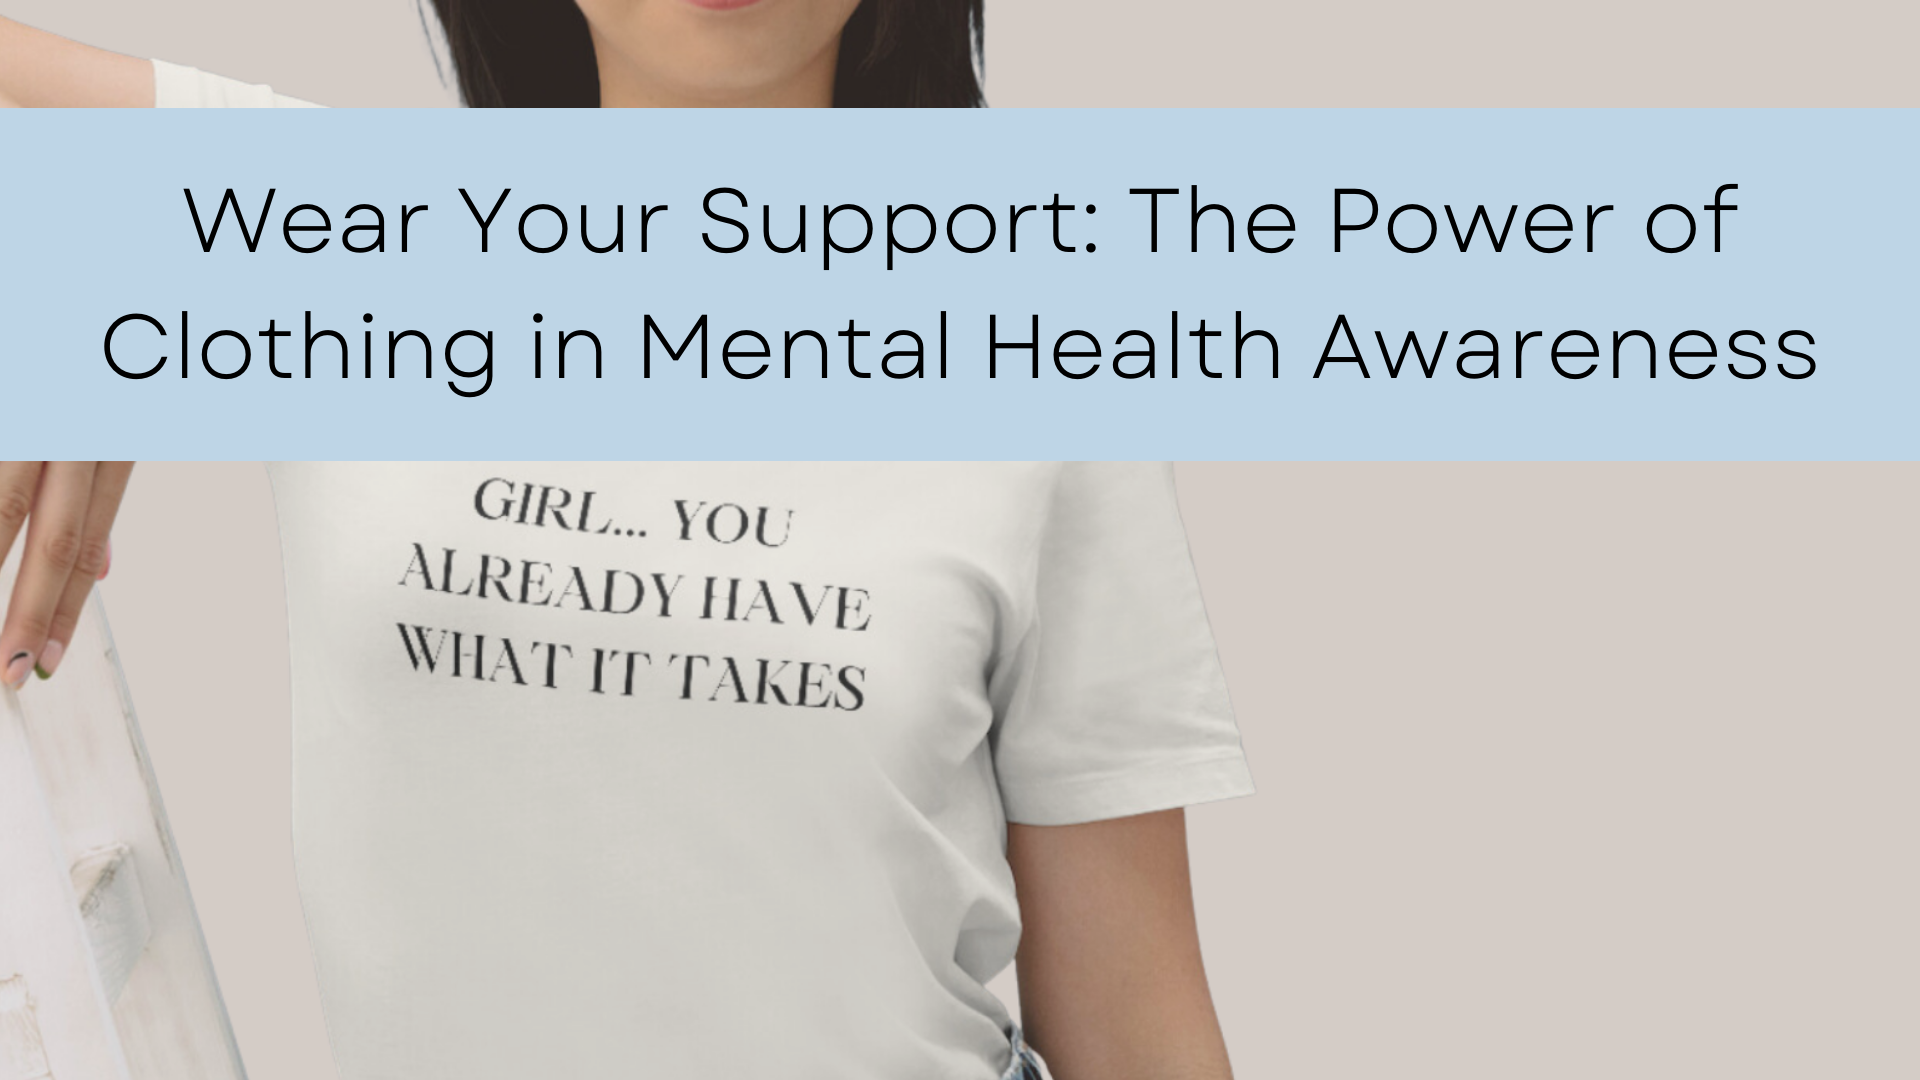 Wear Your Support: The Power of Clothing in Mental Health Awareness